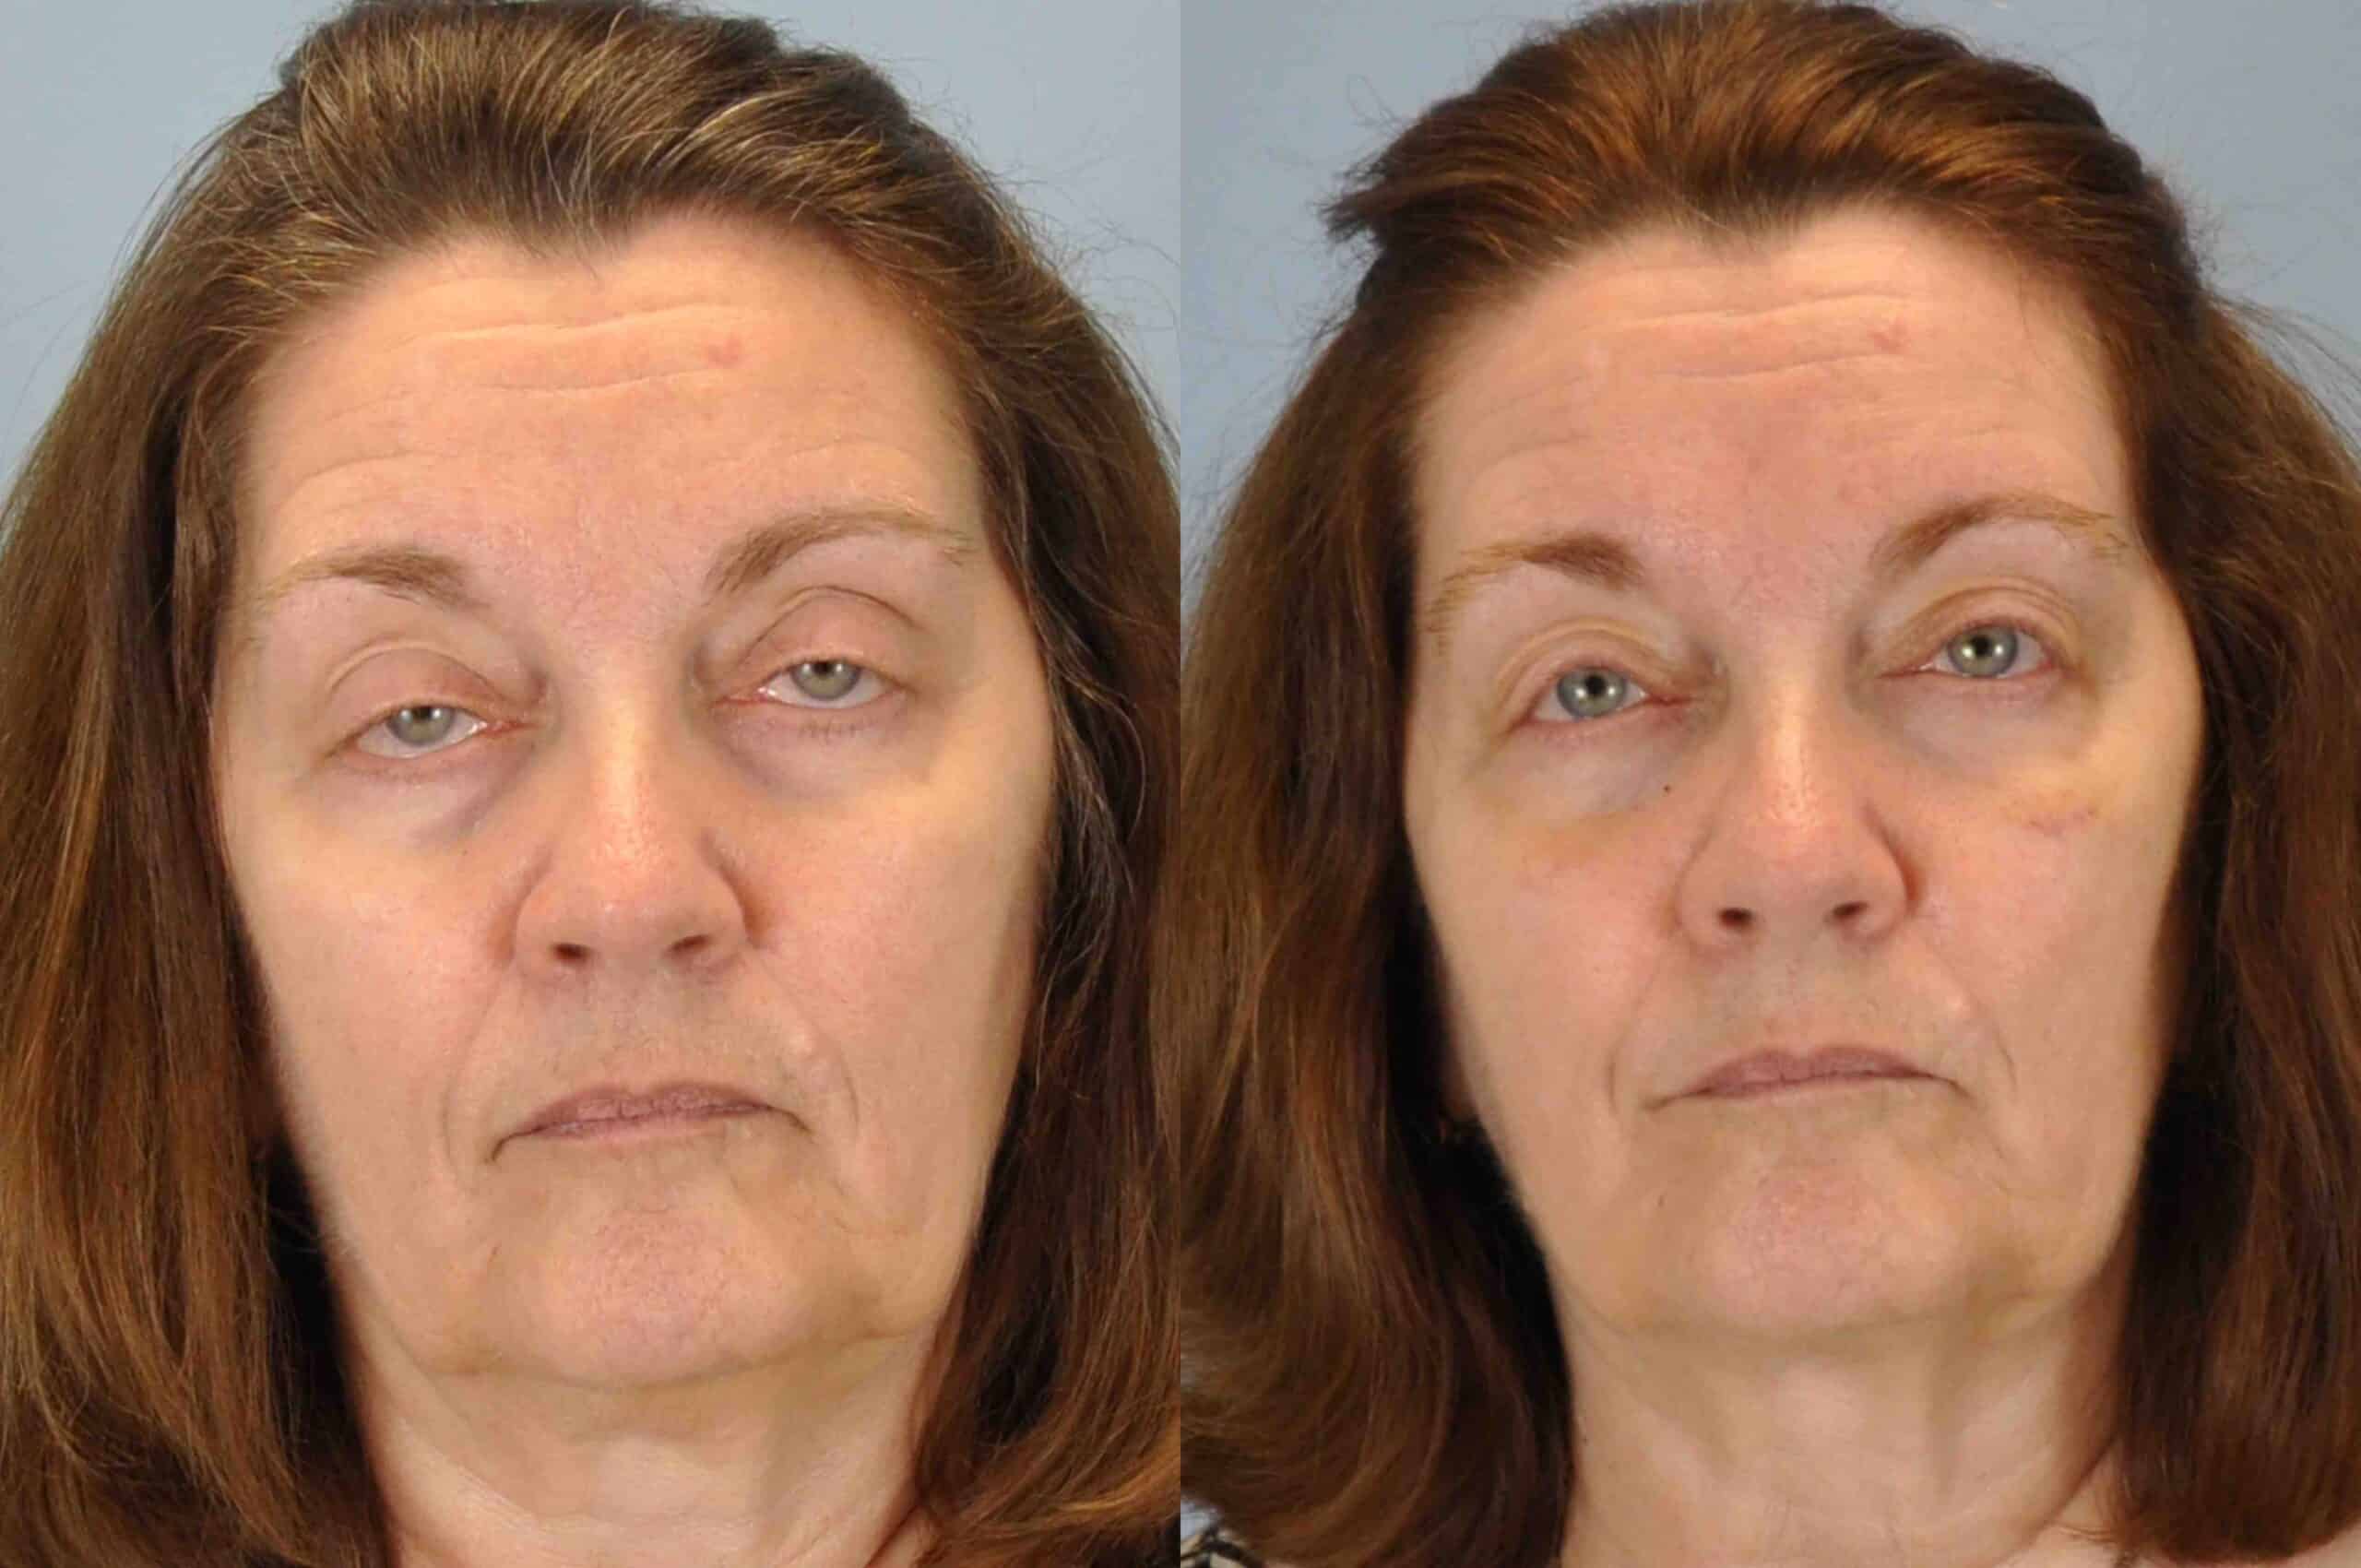 Before and after 3 weeks post op from Lower blepharoplasty, Levator Ptosis performed by Dr. Paul Vanek (front view)